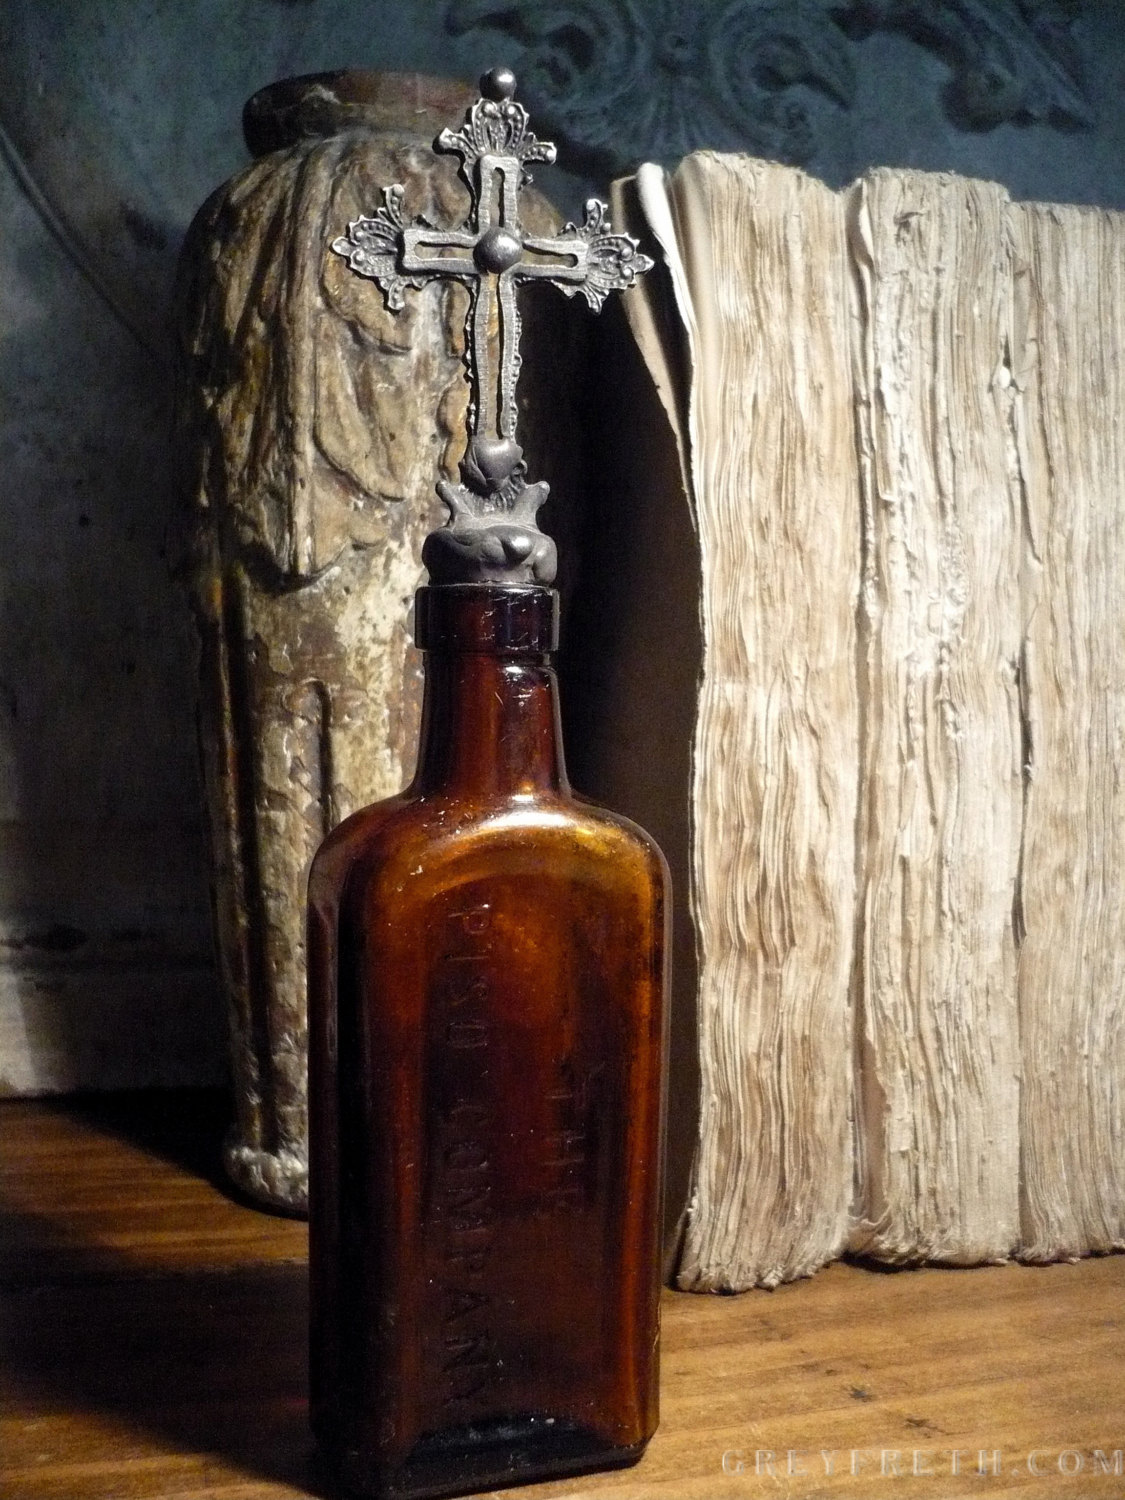 Greyfreth Cross Bottles--The Amber Collection--